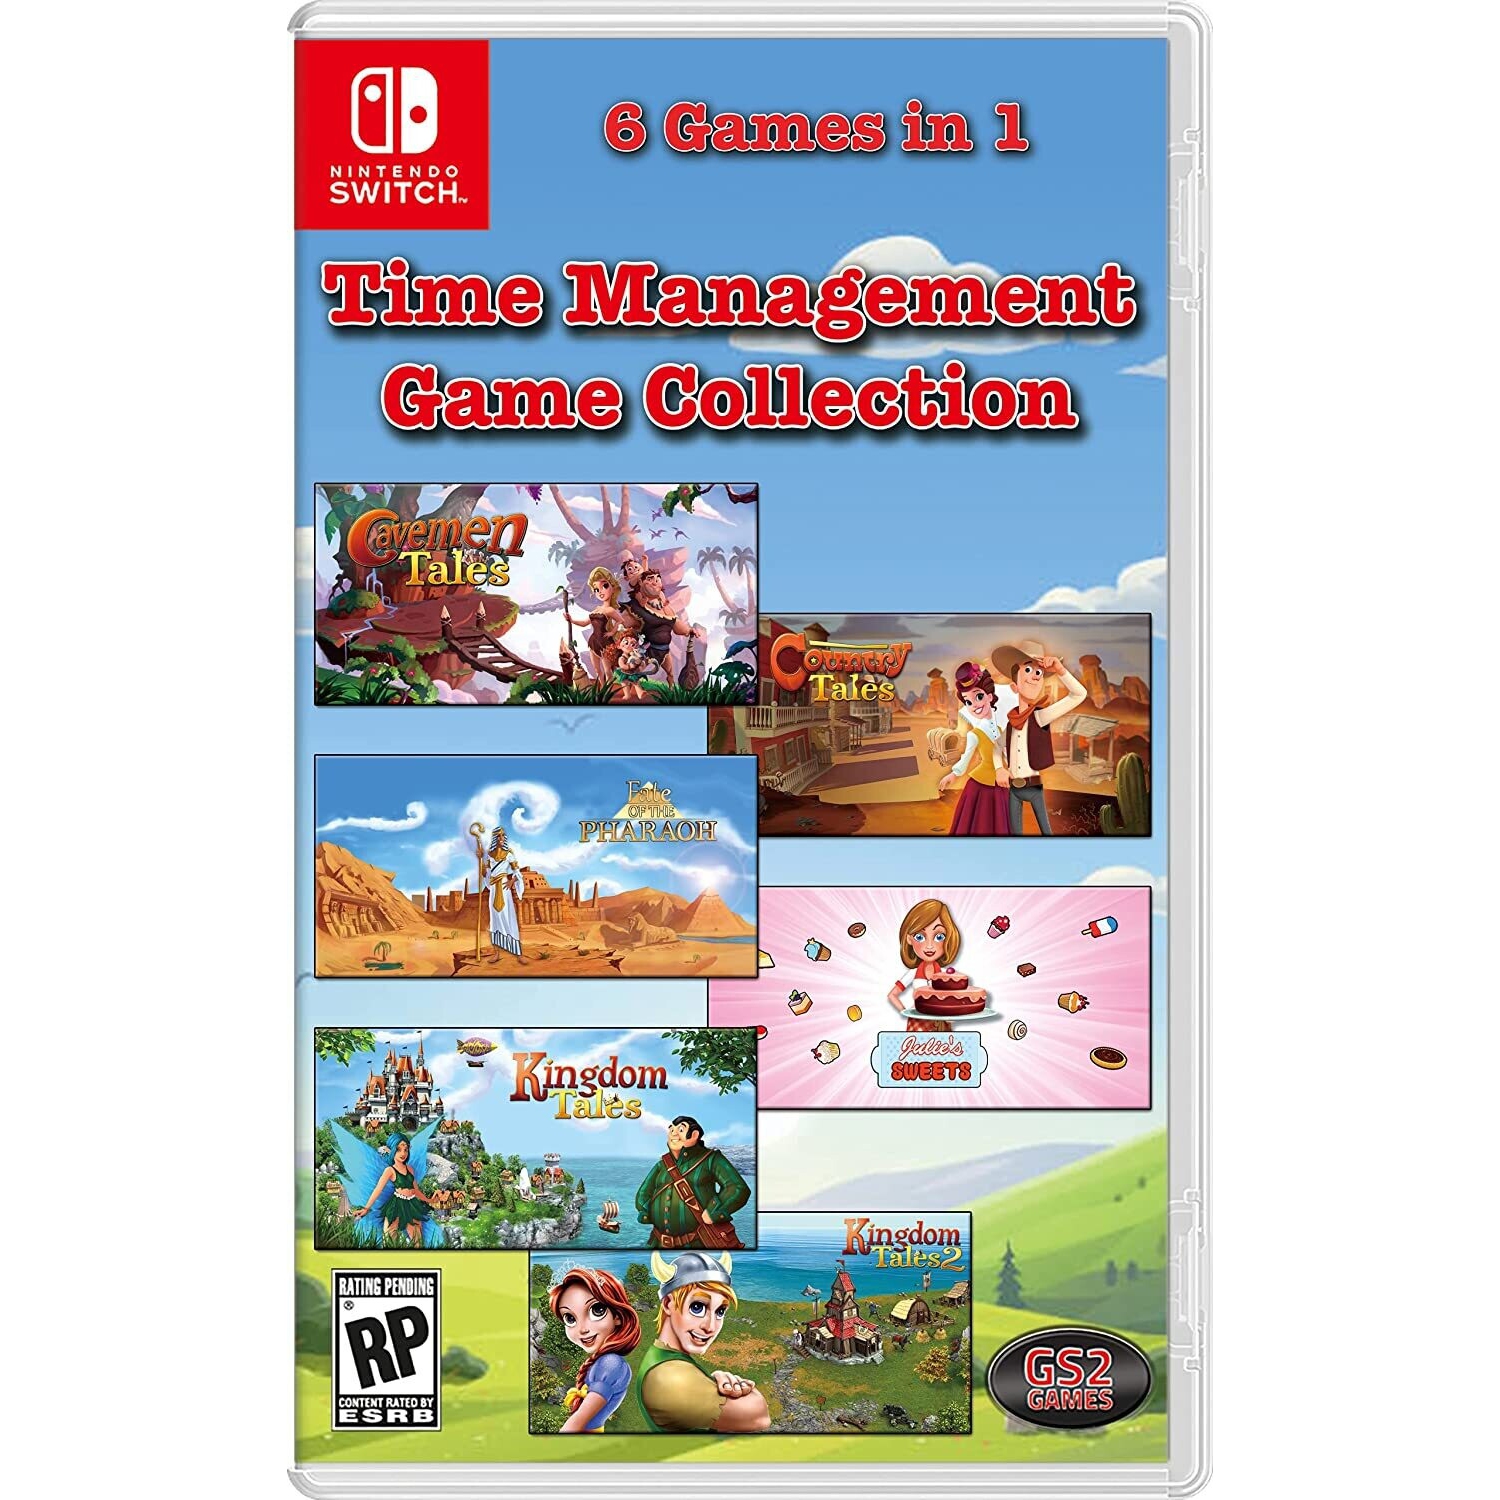 Time Management Game Collection for Nintendo Switch [VIDEOGAMES]